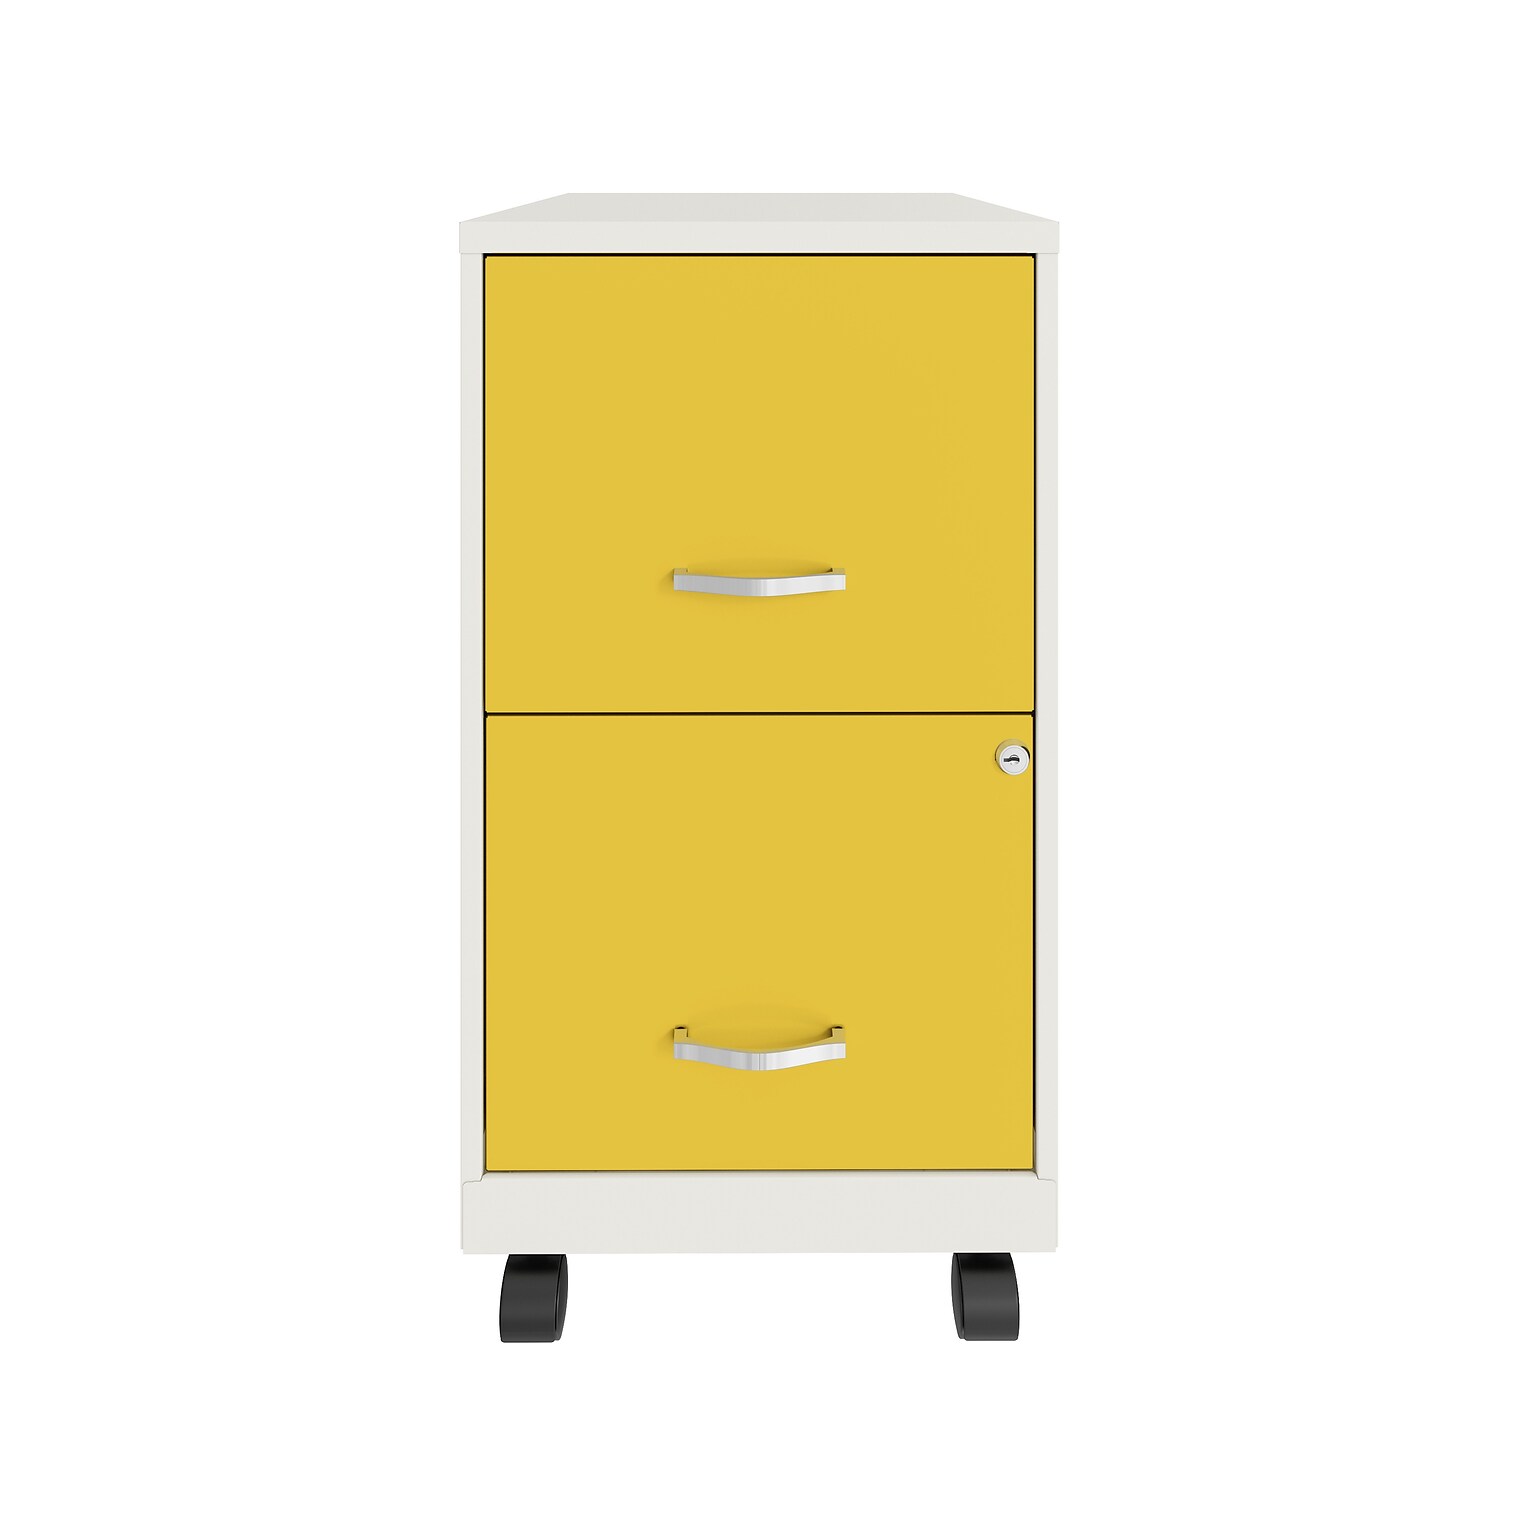 Space Solutions SOHO Smart File 2-Drawer Mobile Vertical File Cabinet, Letter Size, Lockable, Pearl White/Goldfinch (25337)